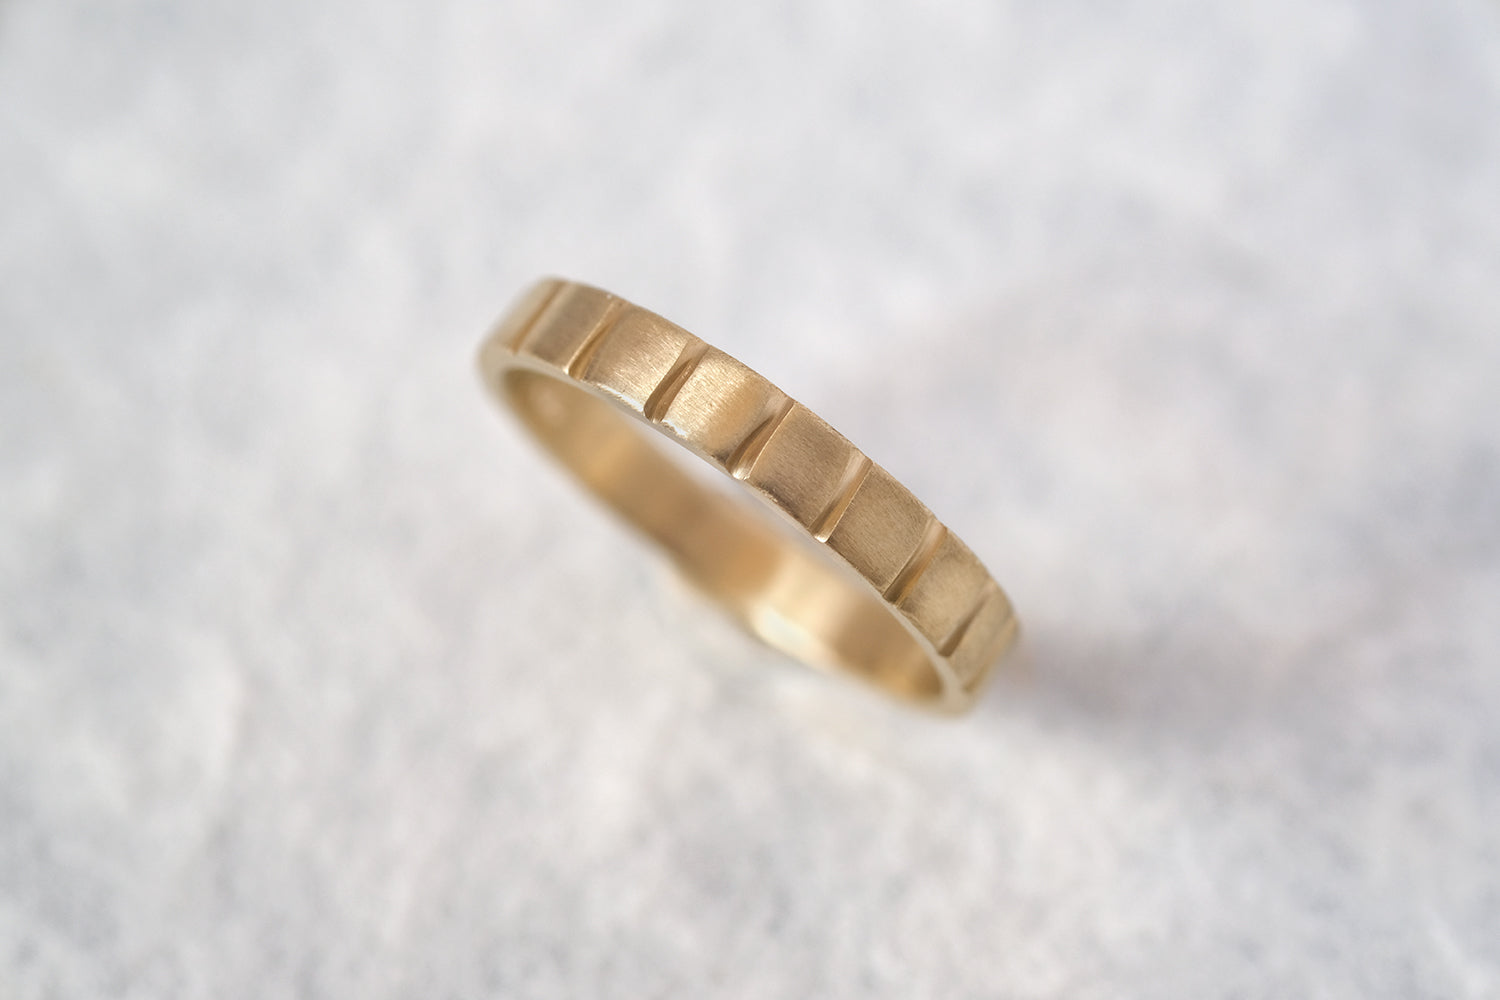 Gold Wedding Band With Squares